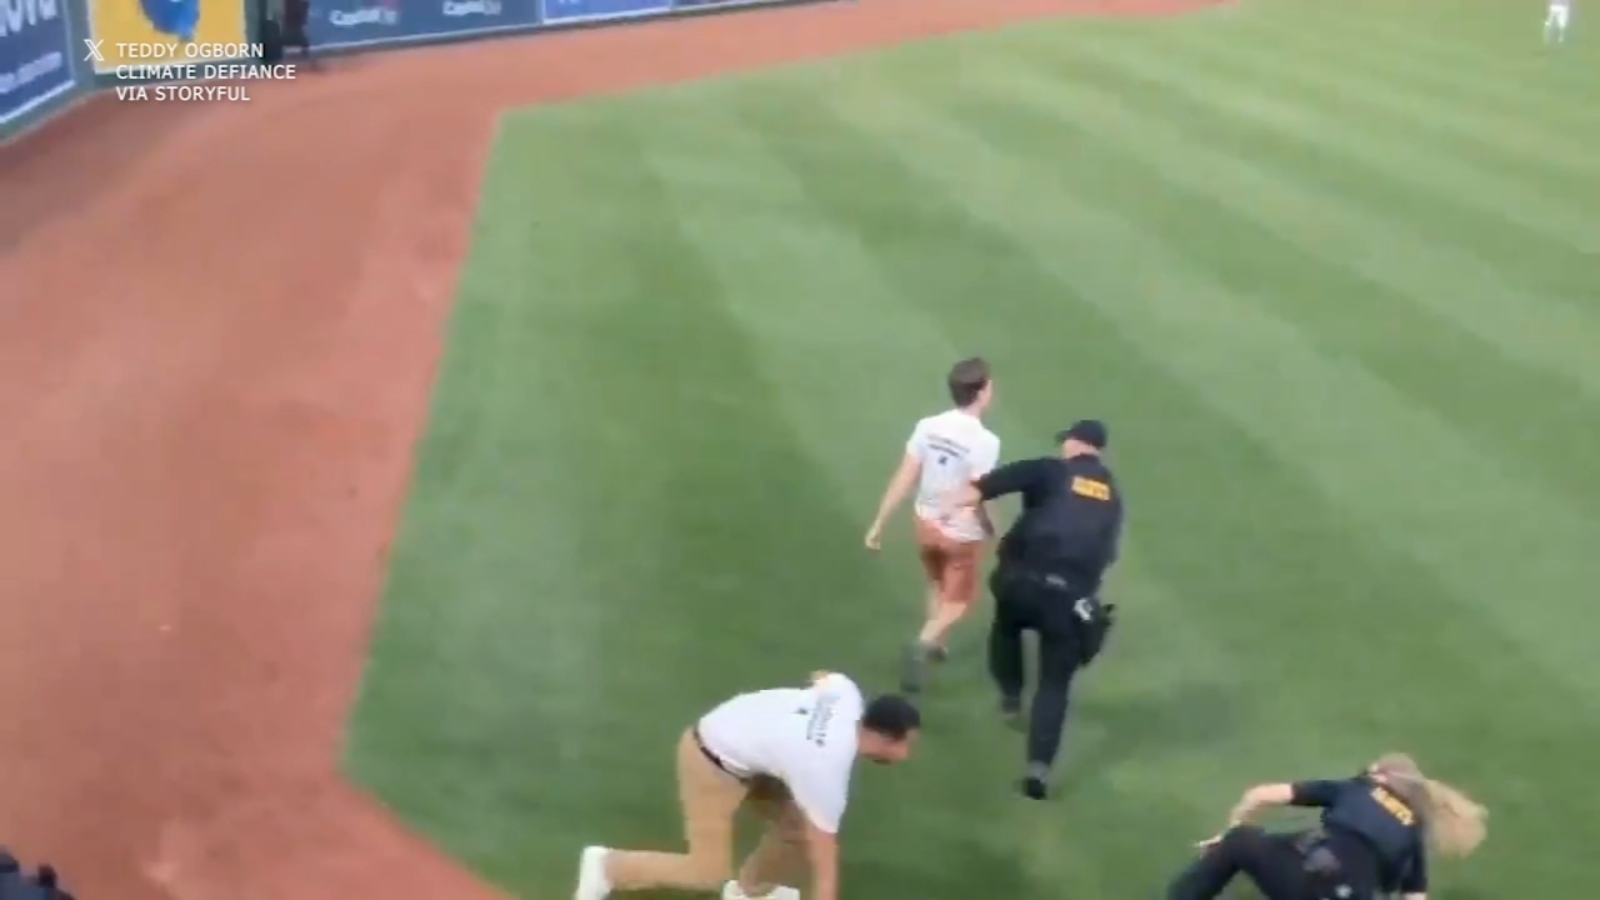 8 climate protesters arrested during Congressional Baseball Game: Police [Video]